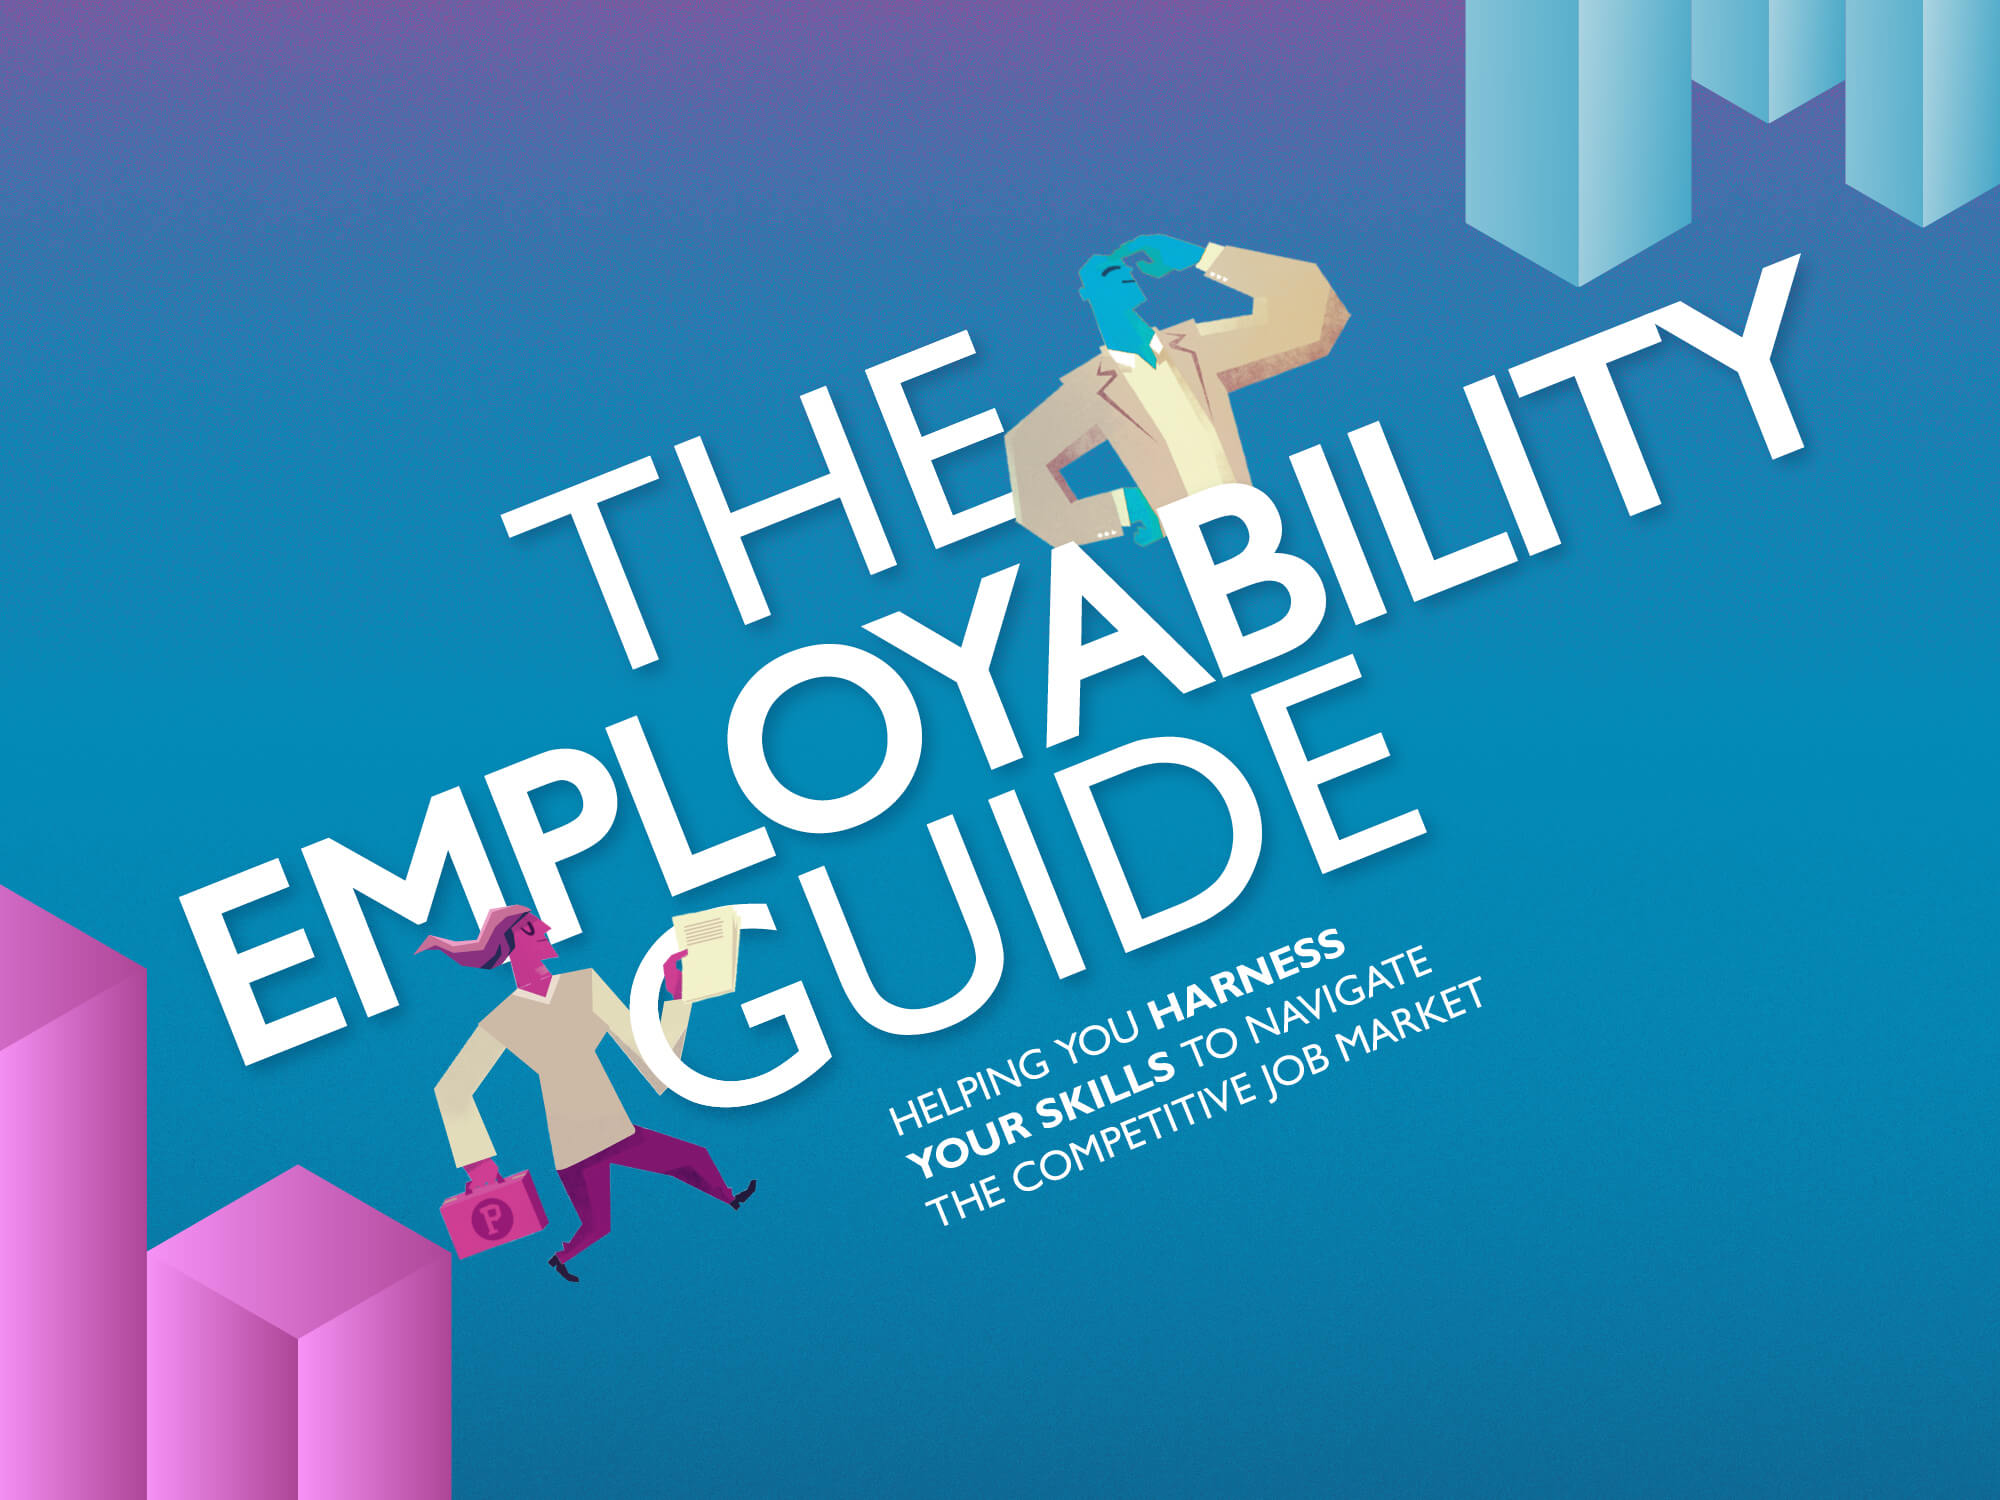 The Employability Guide title on blue background with avatars